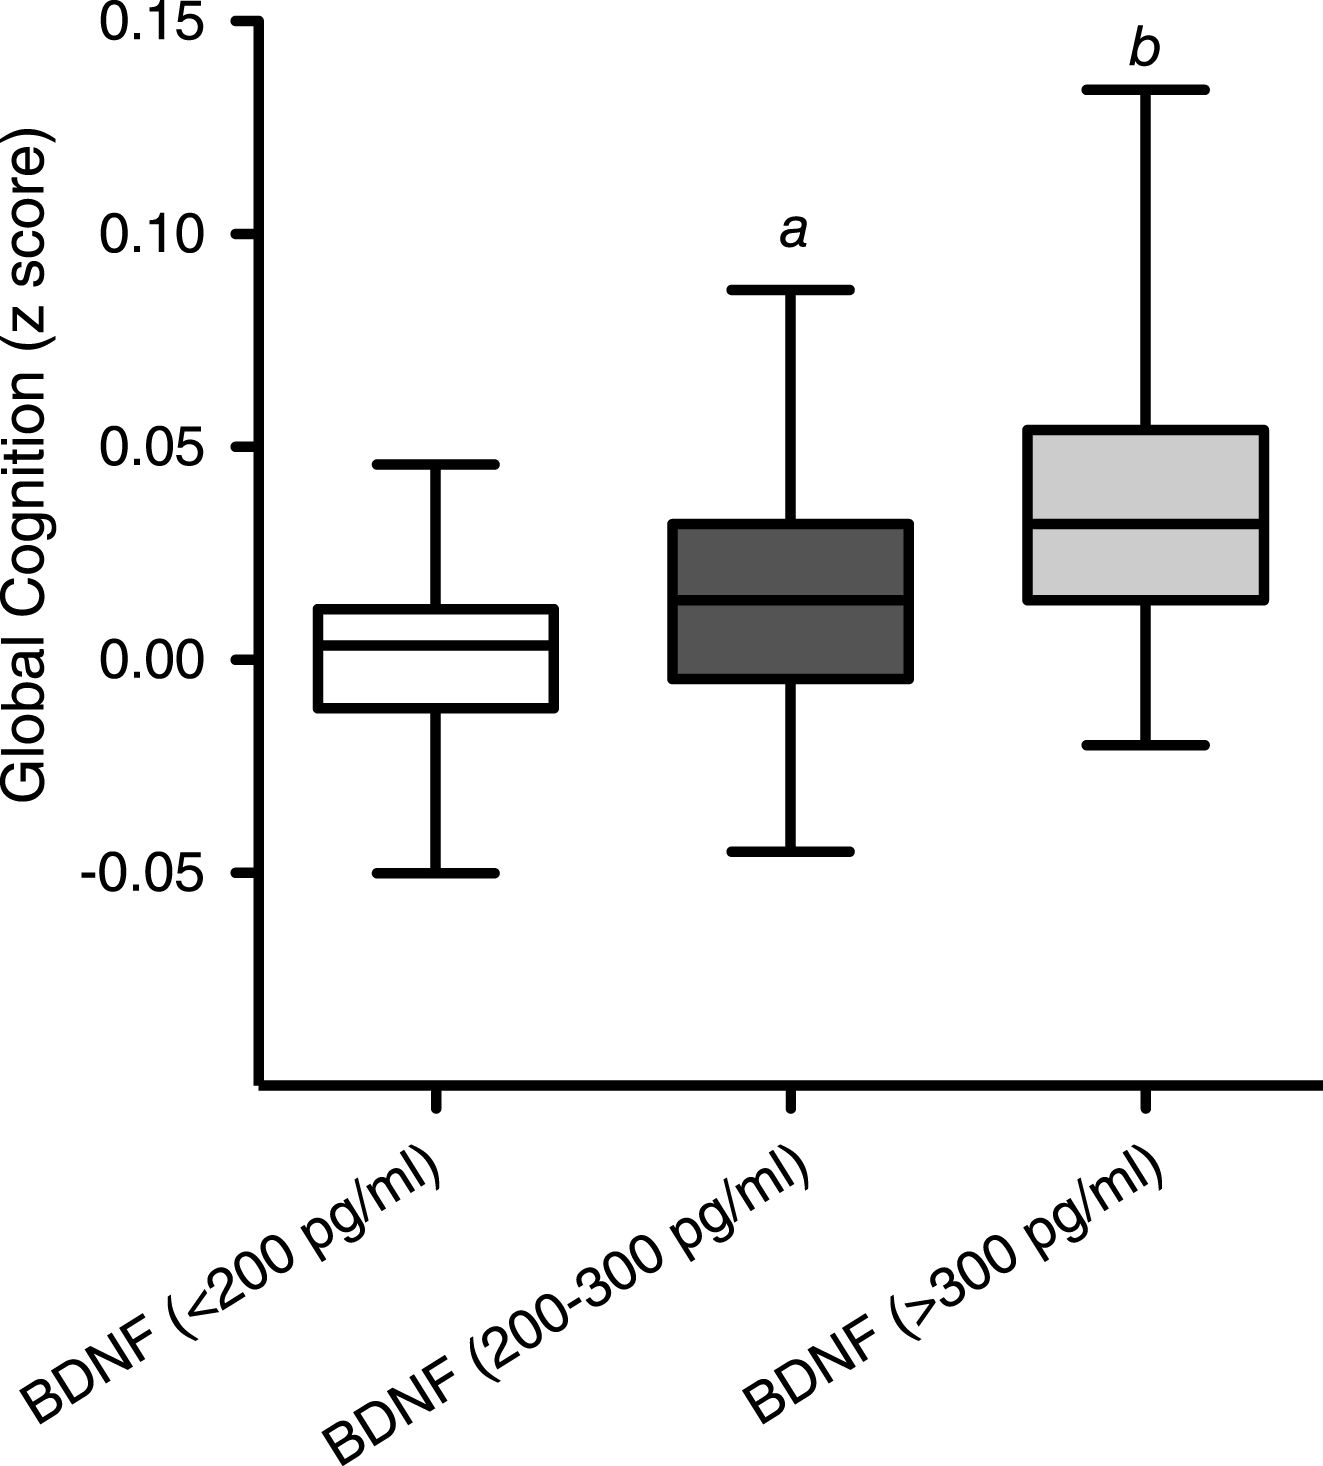 A) The relationship between Cognitive score (z-score) in 3 dietary groups over the period of 12 weeks. B) The relationship between BDNF level and z-score (cognitive score) Each point represents a dietary group at a specific visit and is an average of their z score and BDNF level for each. Hence there are 12 points.